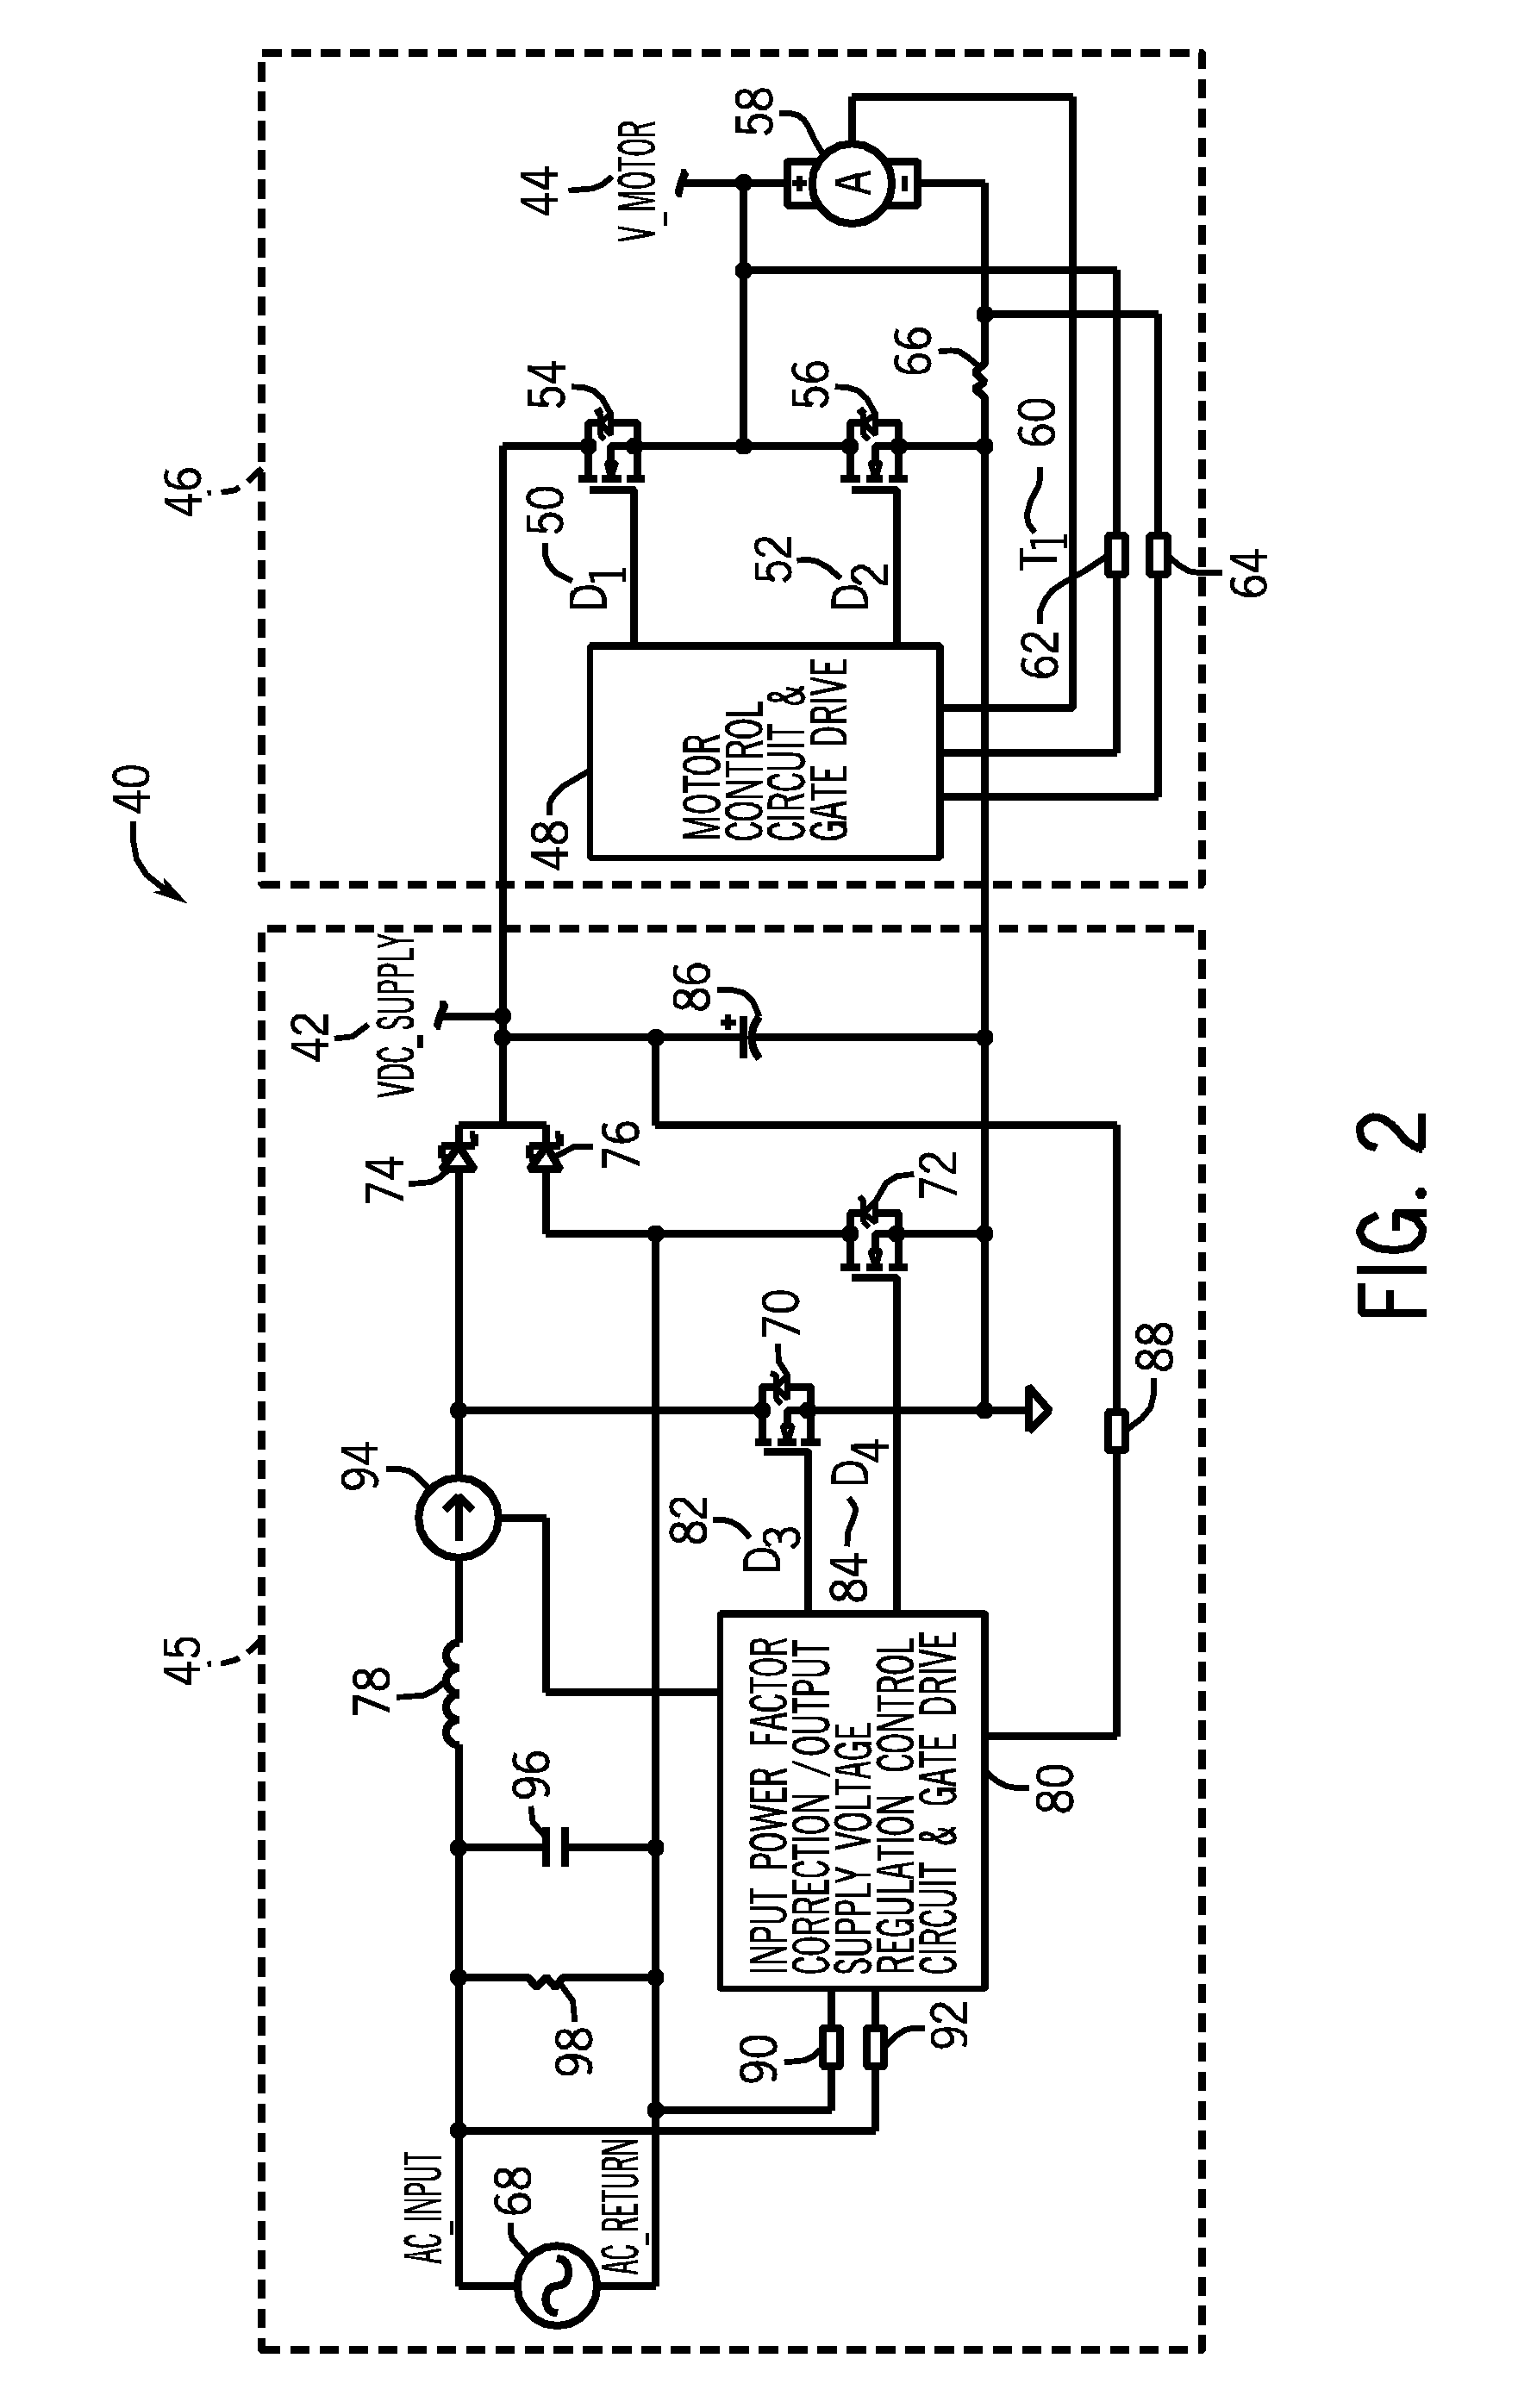 Voltage regulated DC supply circuit for a wire feed drive system